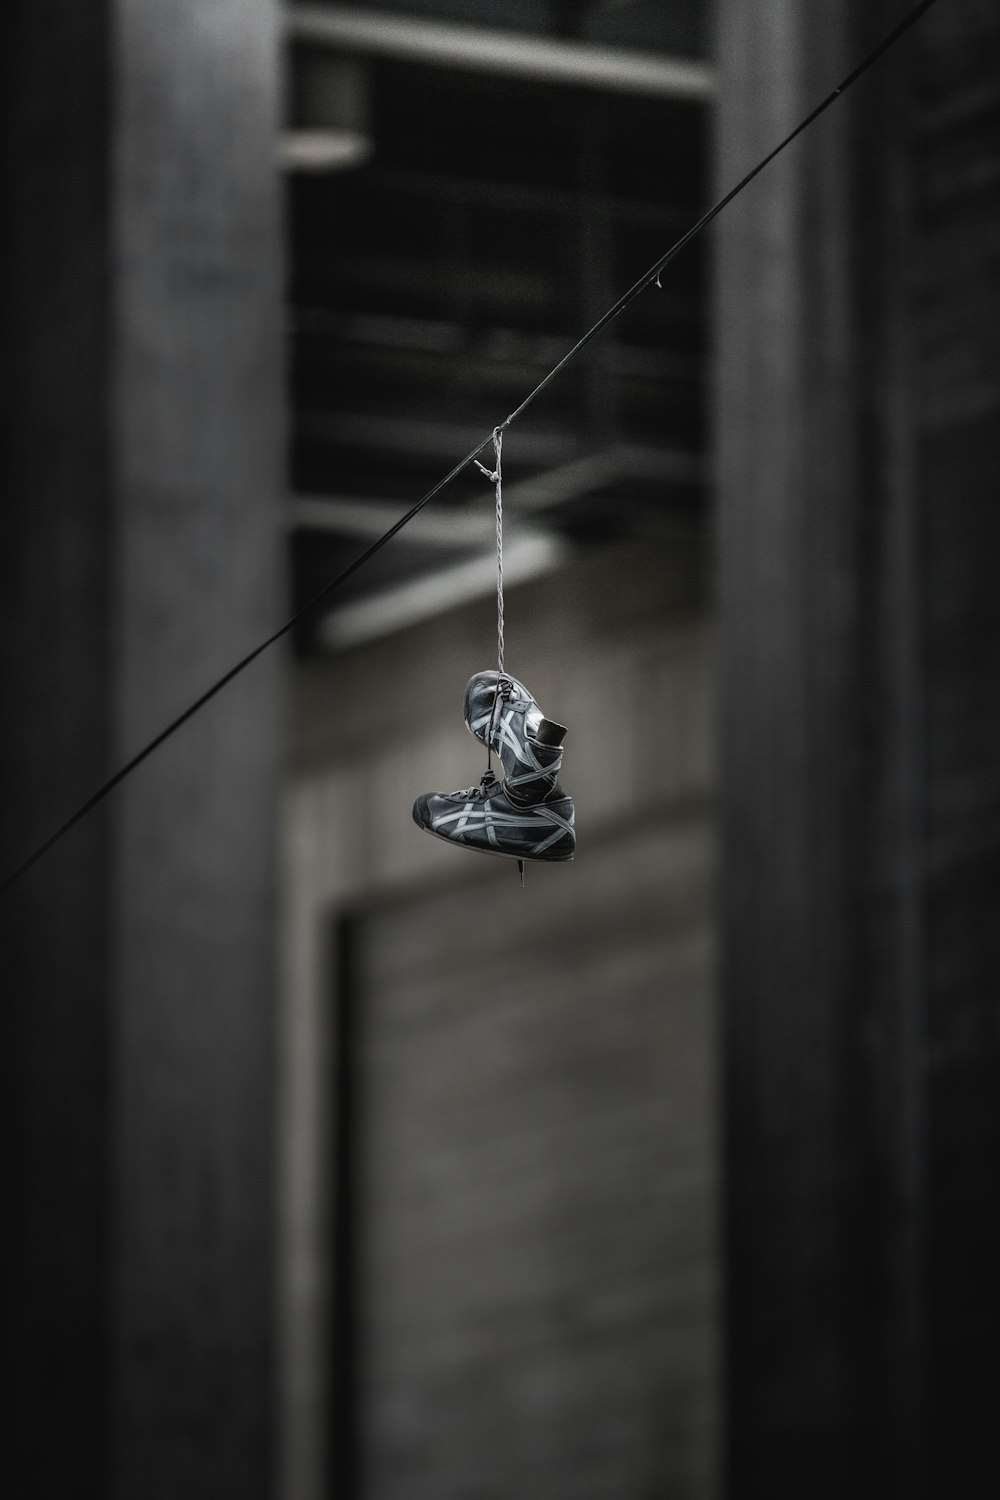 pair of black-and-gray ASICS shoes hanging on wire